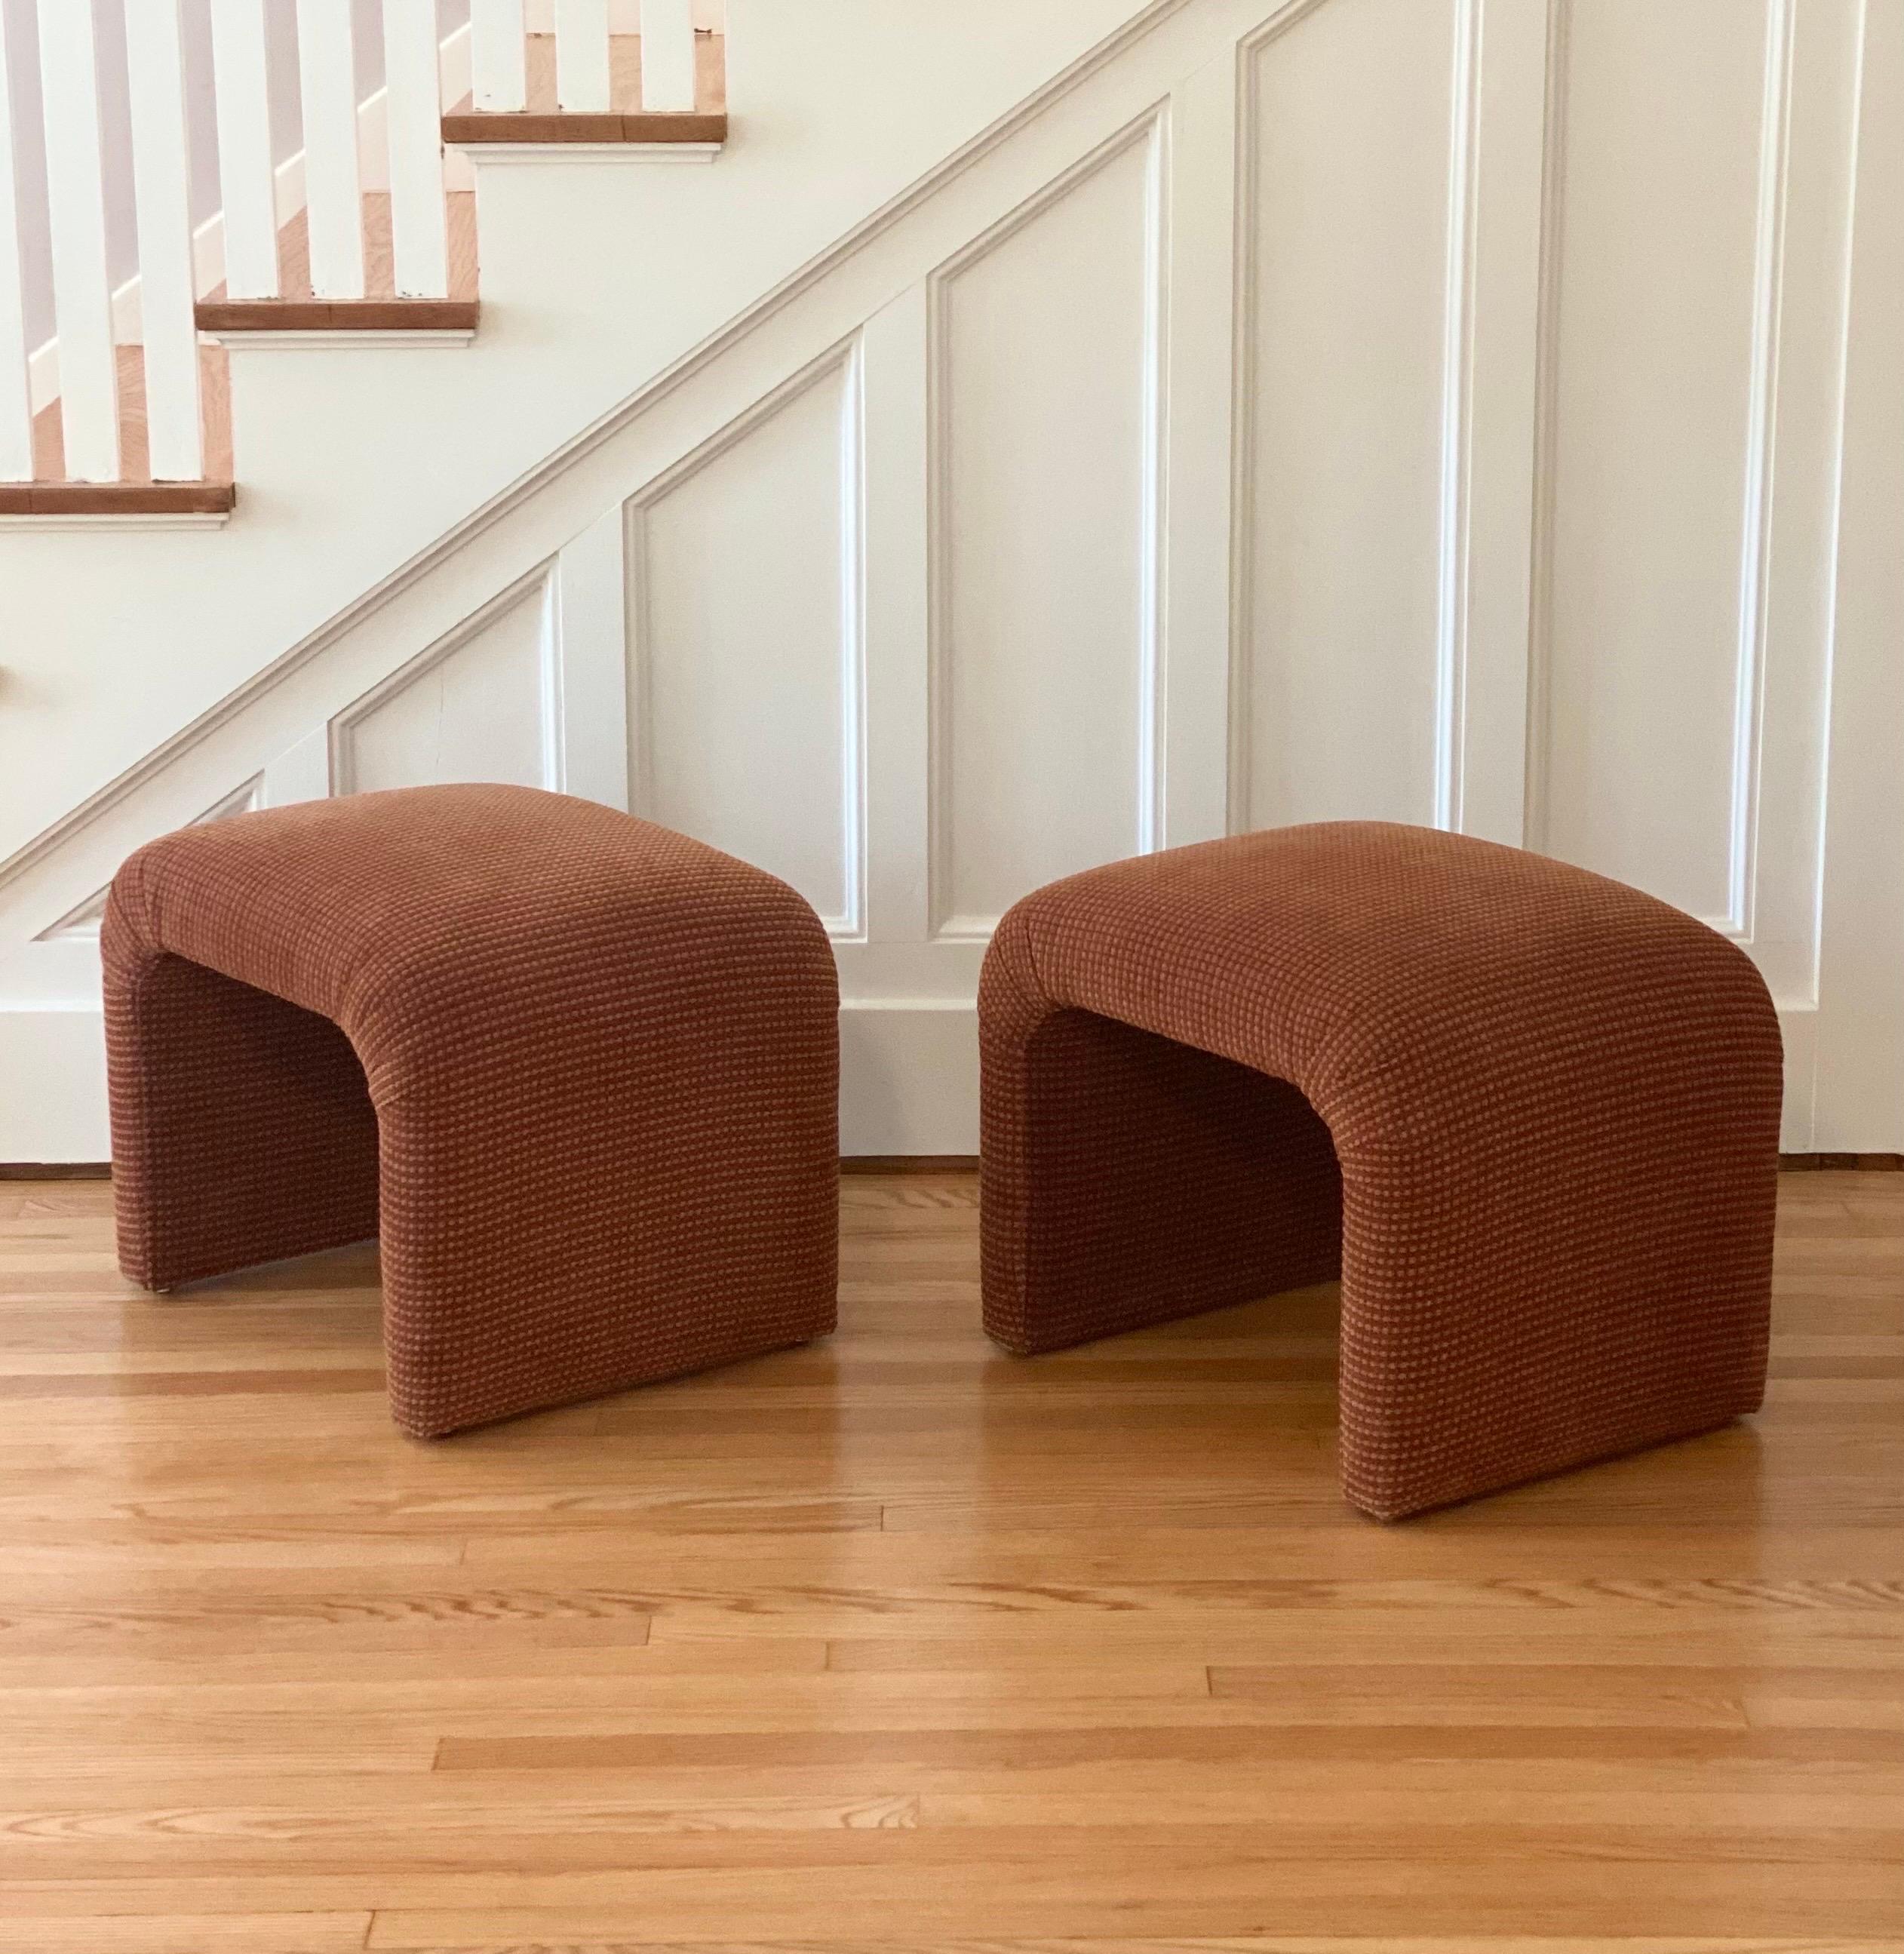 Late 20th Century 1980s Vintage Karl Springer Style Waterfall Upholstered Ottomans, a Pair